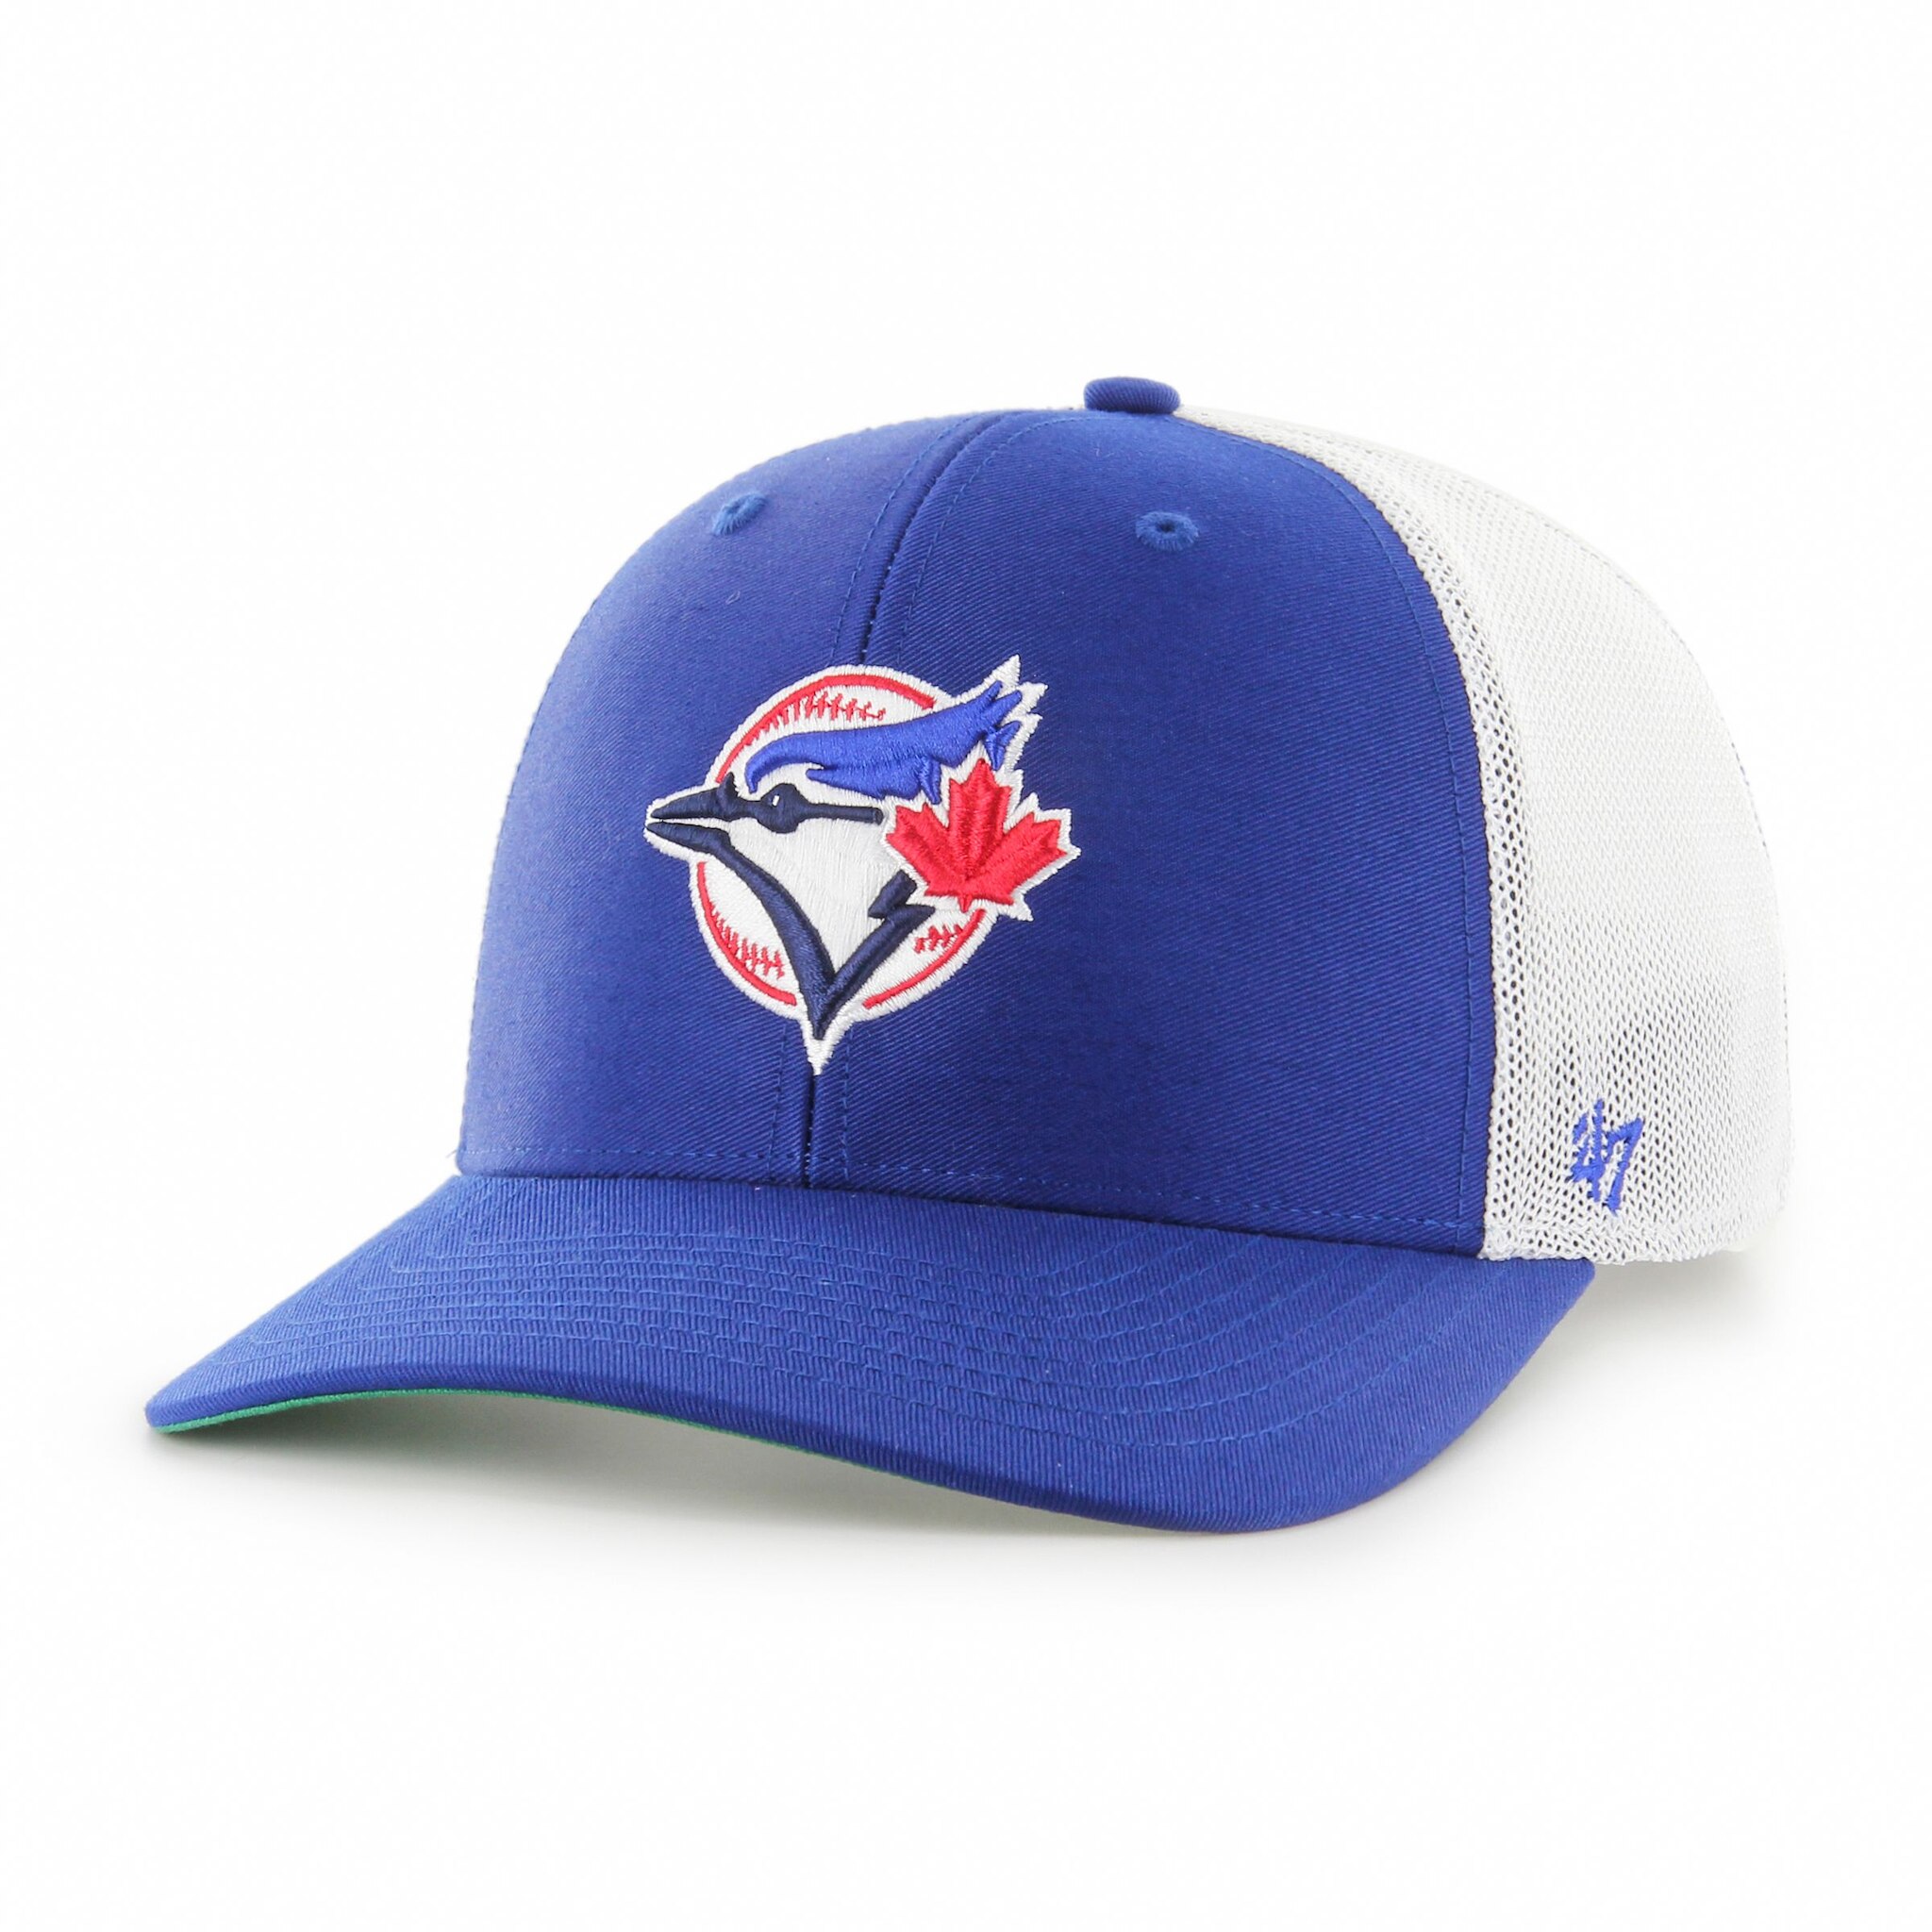 Blue Jay Fitted Stretch Mesh Cap